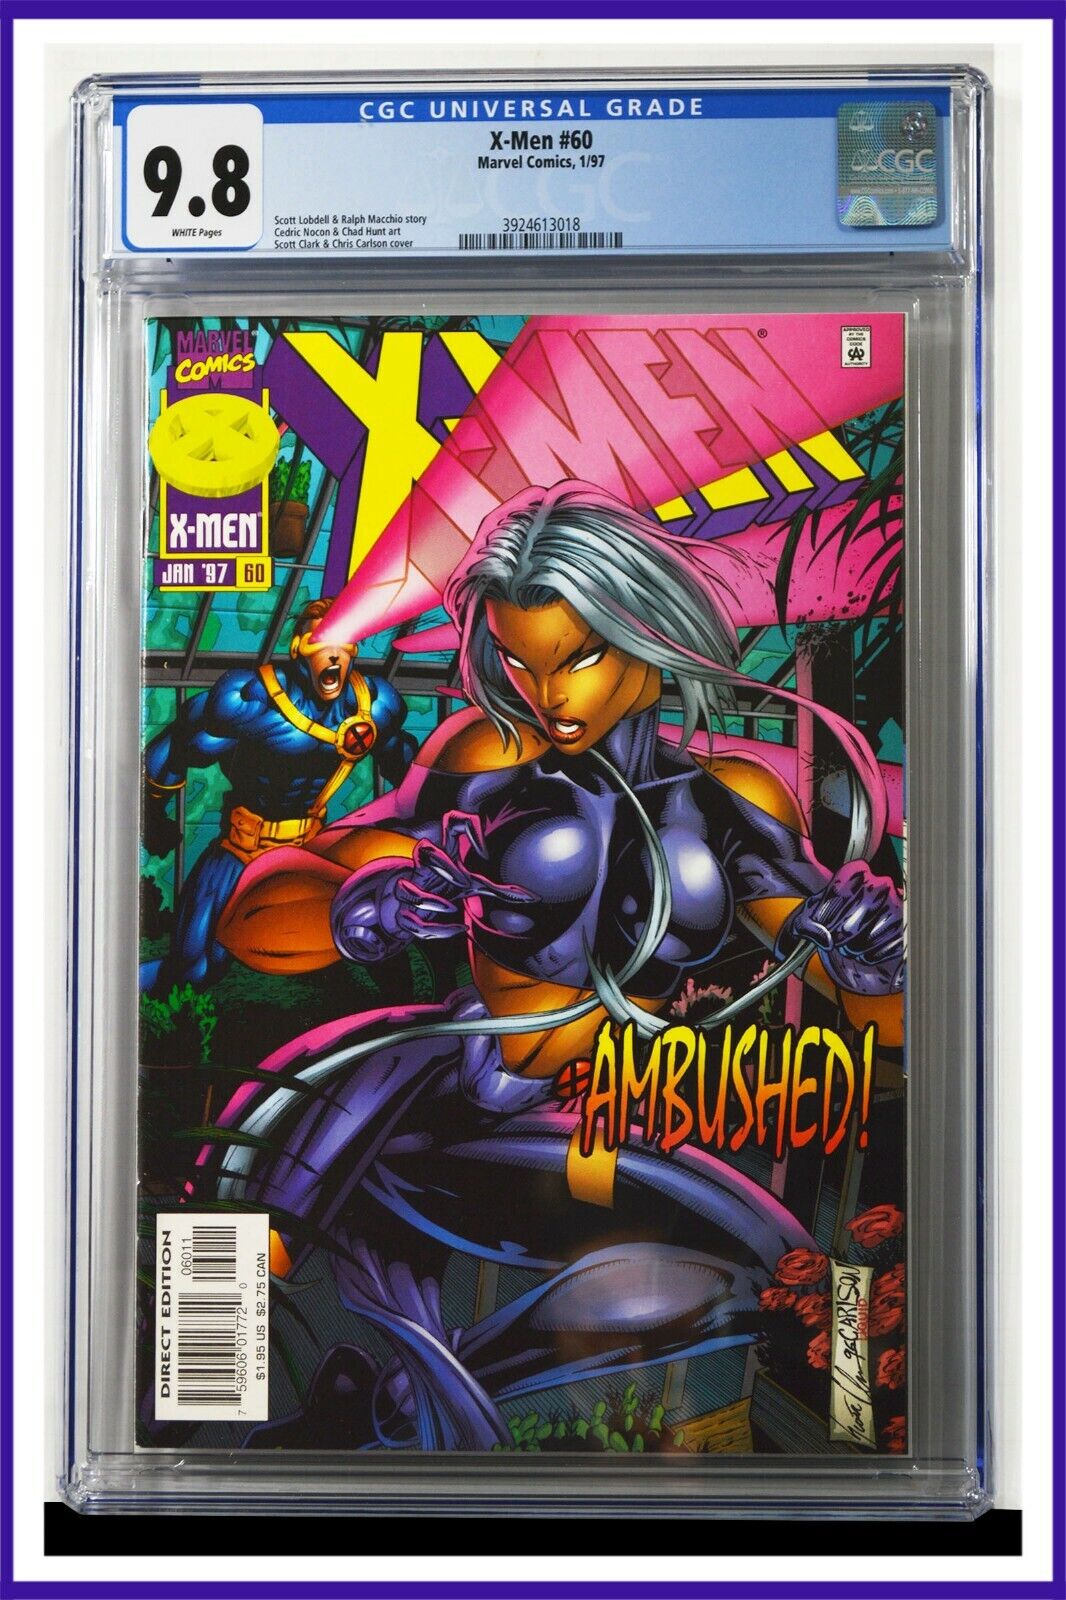 X-Men #60 CGC Graded 9.8 Marvel January 1997 White Pages Comic Book.